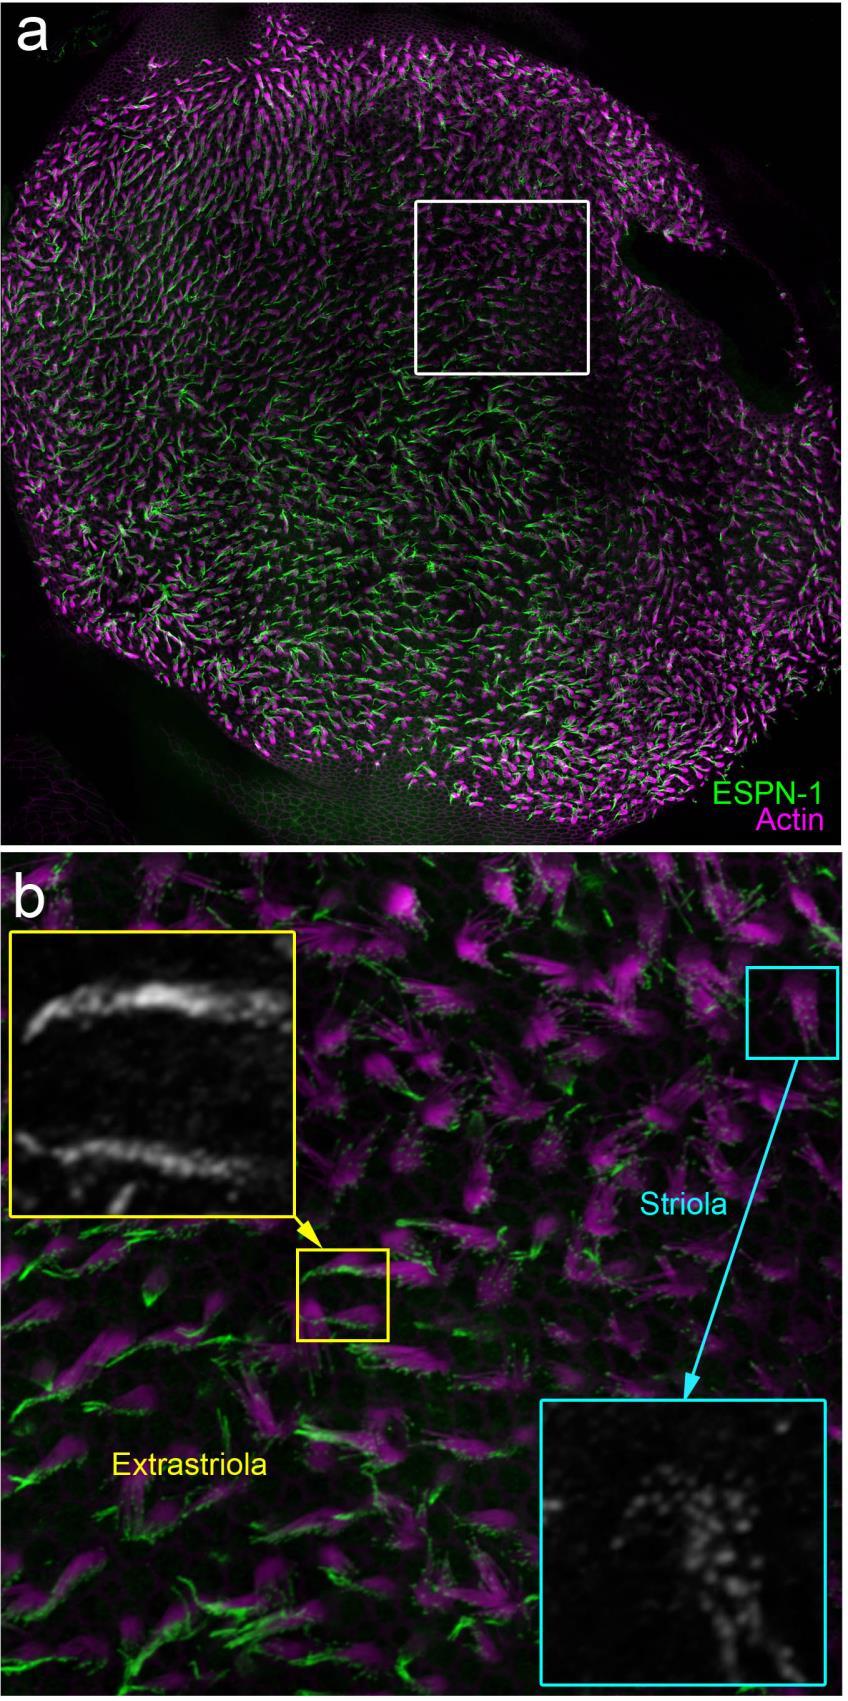 Supplementary Figure 6. High-resolution view of ESPN-1 in the extrastriolar region of the utricle. Same figure layout as Supplementary Figure 3.